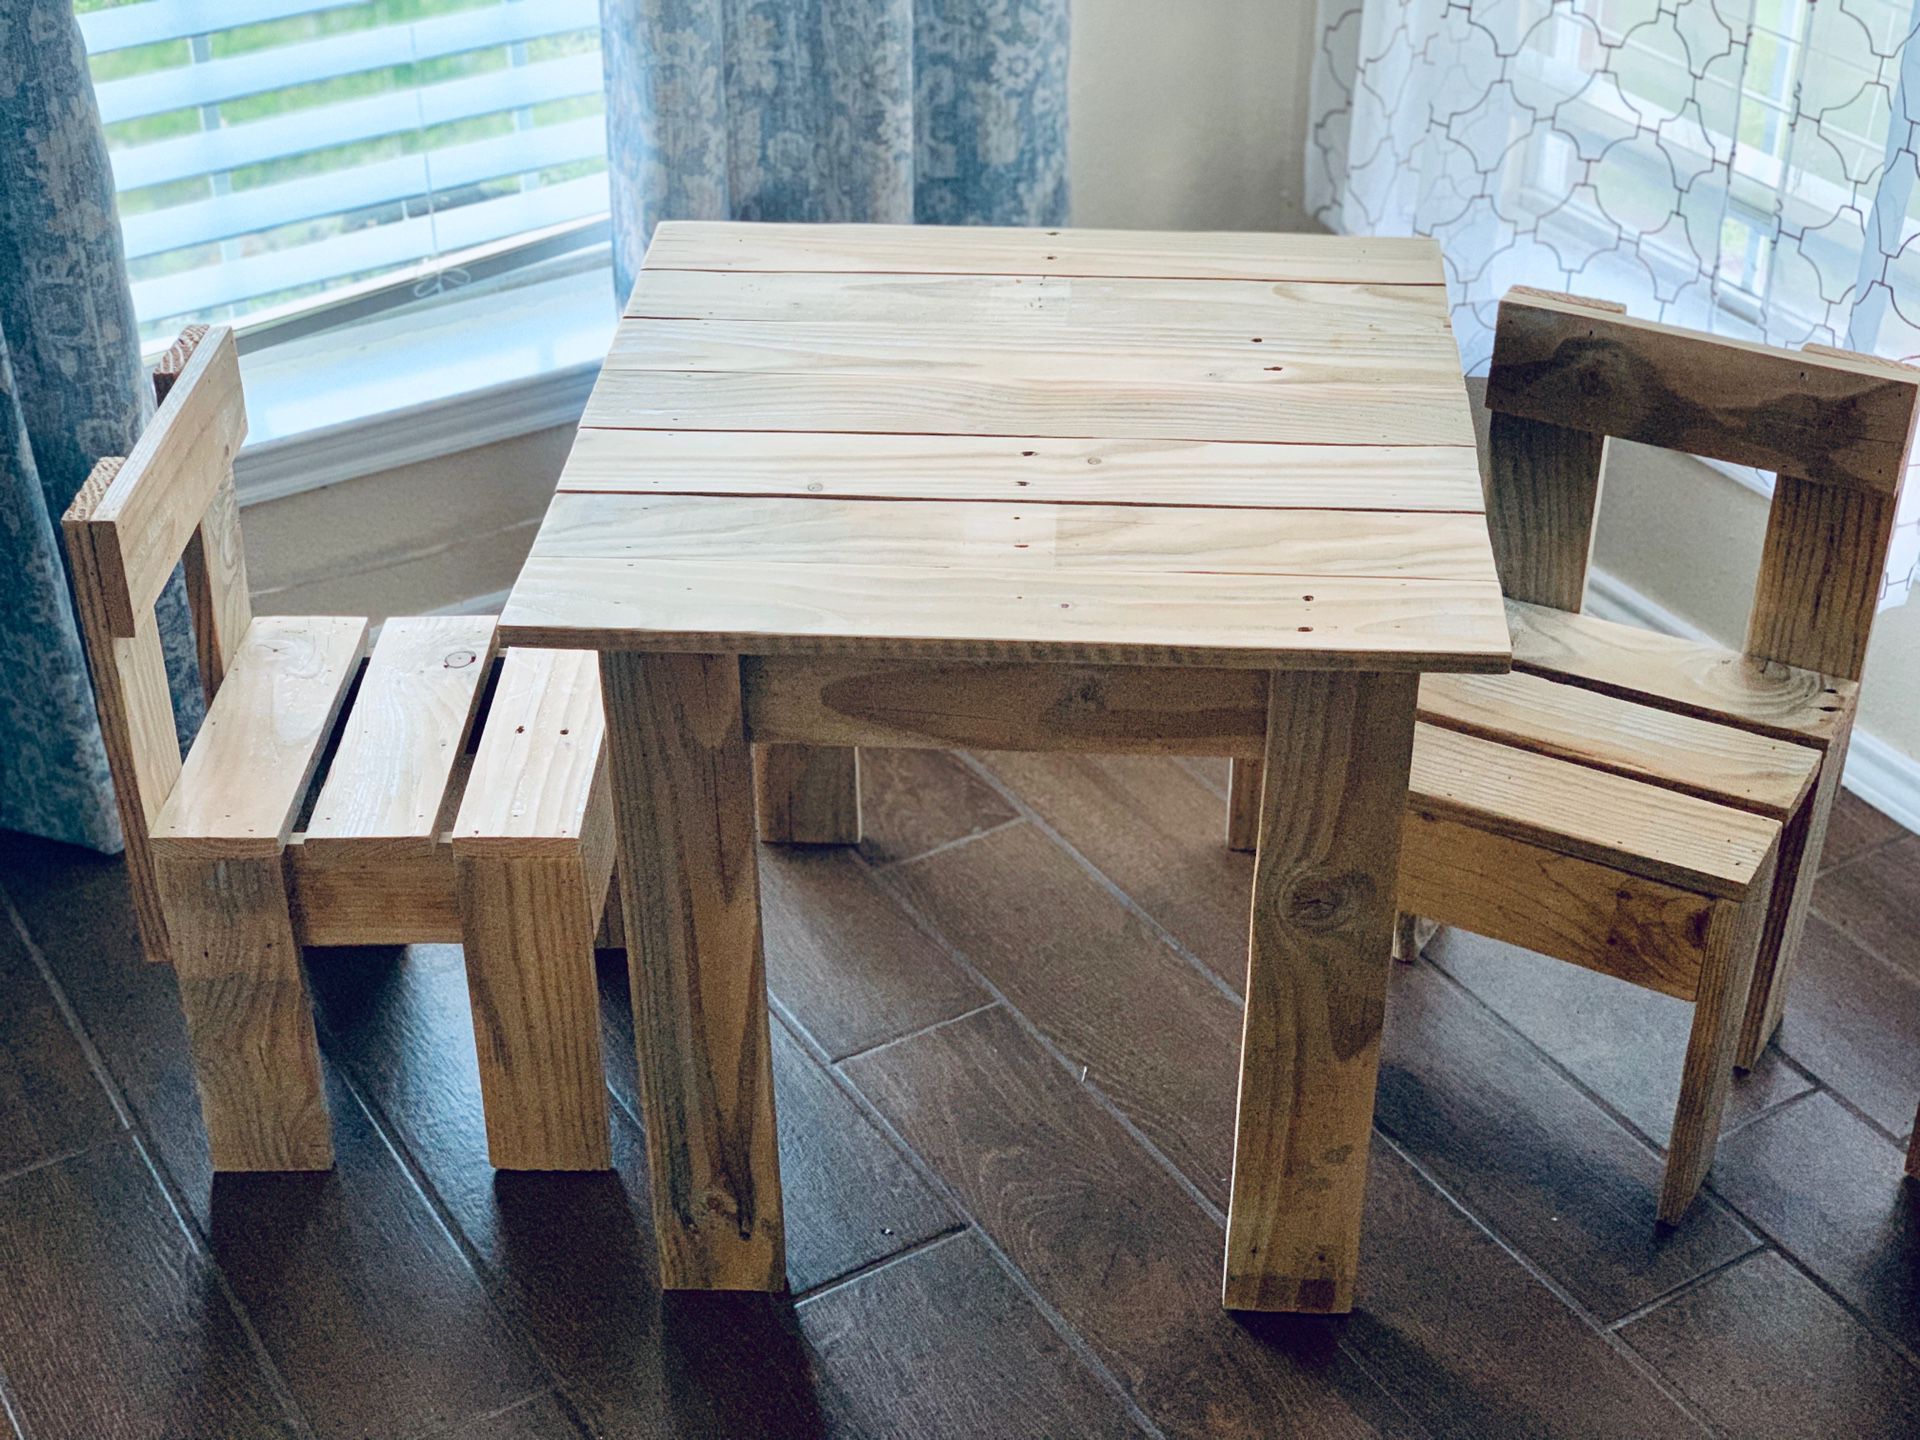 Wooden kids table with two chairs